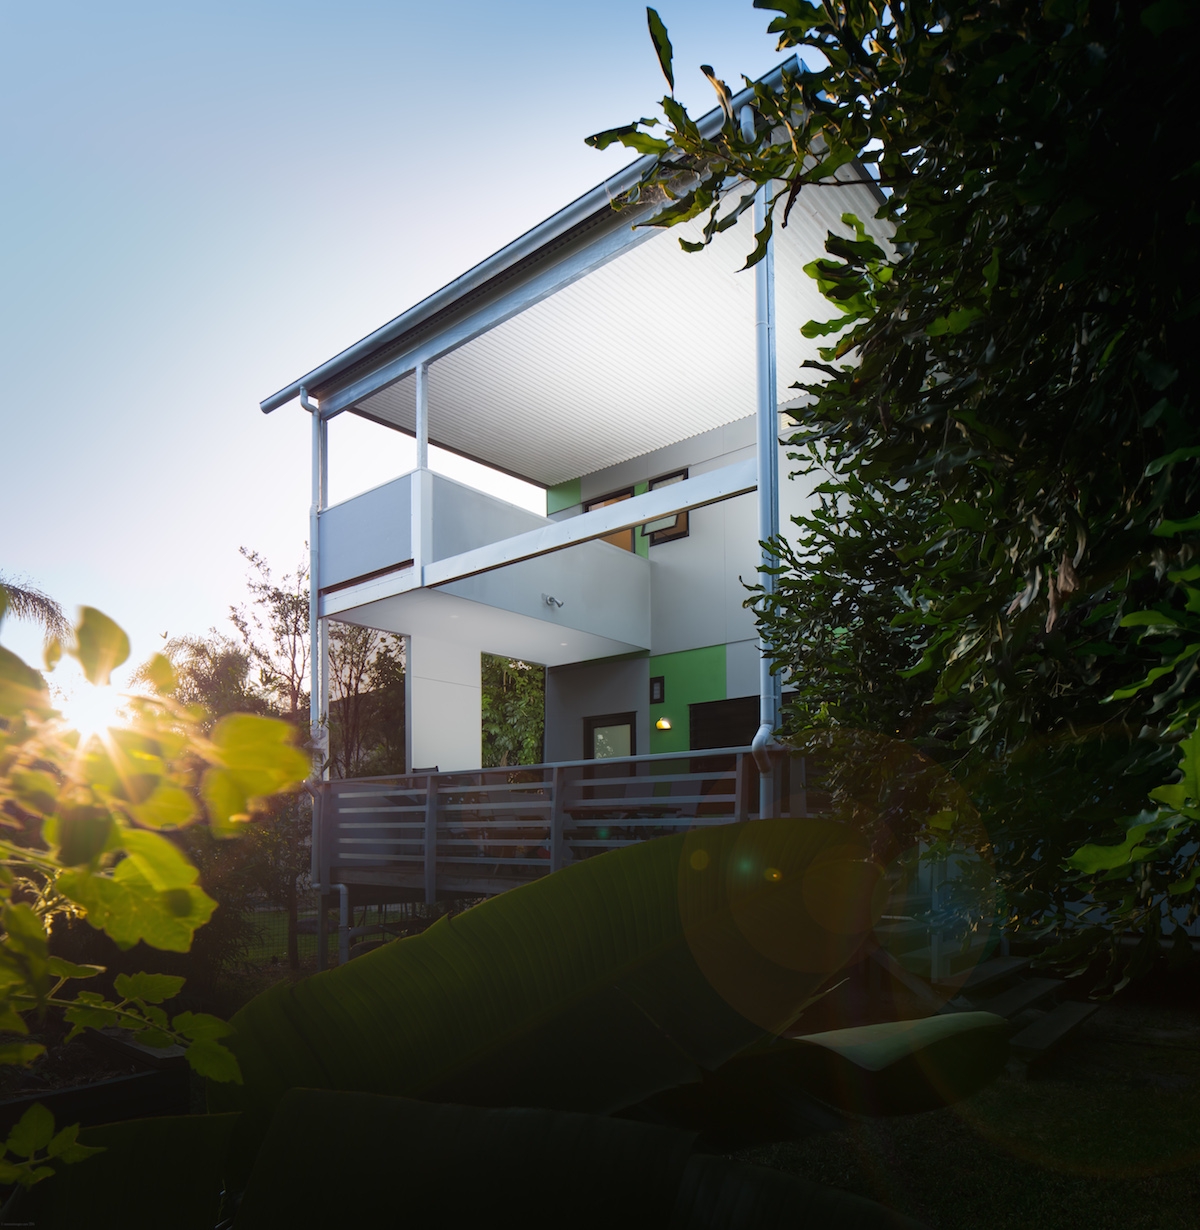 New residential architectural project Brisbane